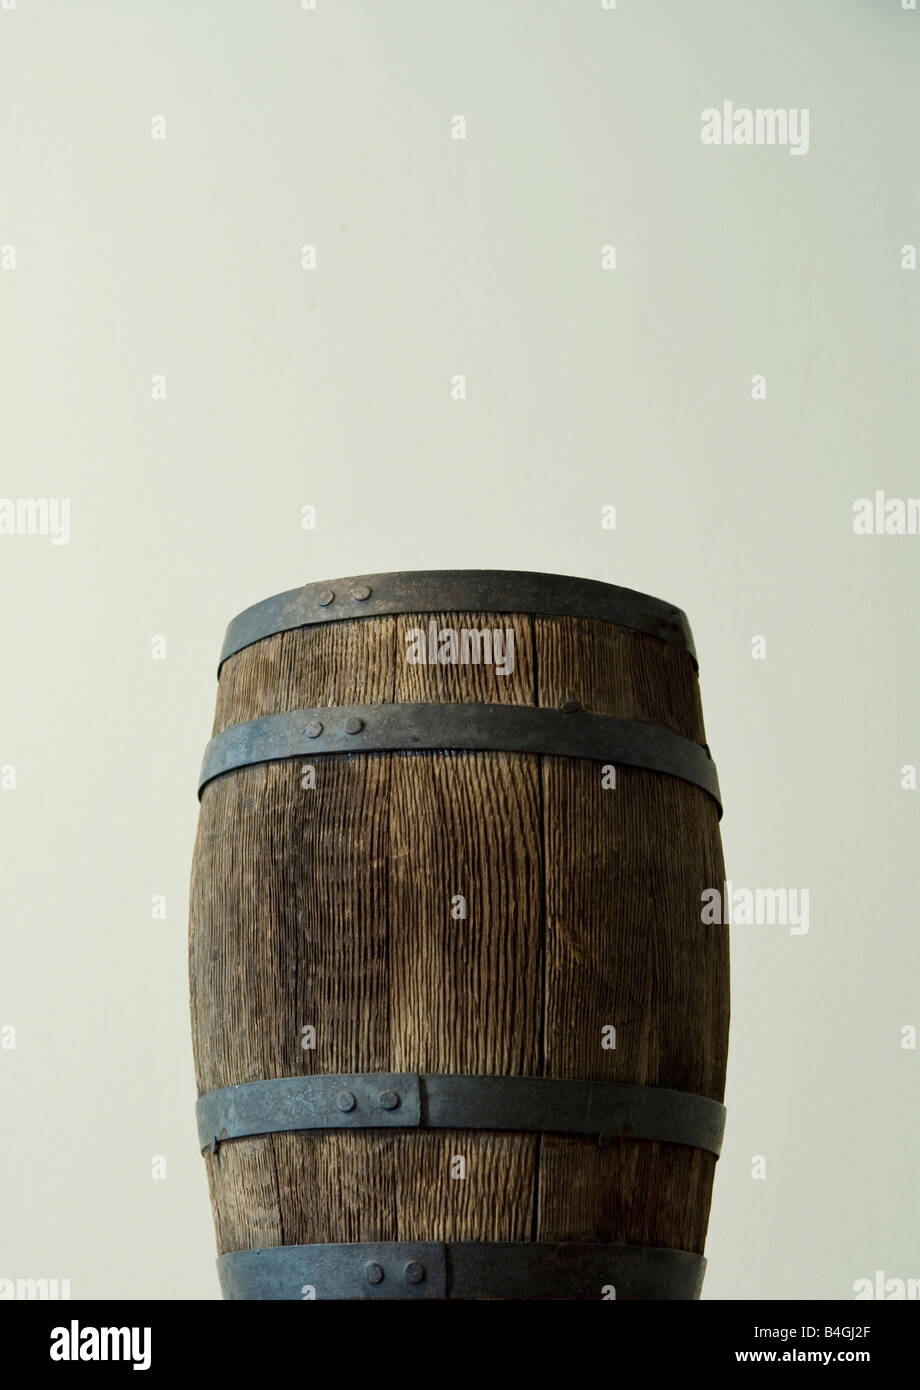 low angle view of cask Stock Photo